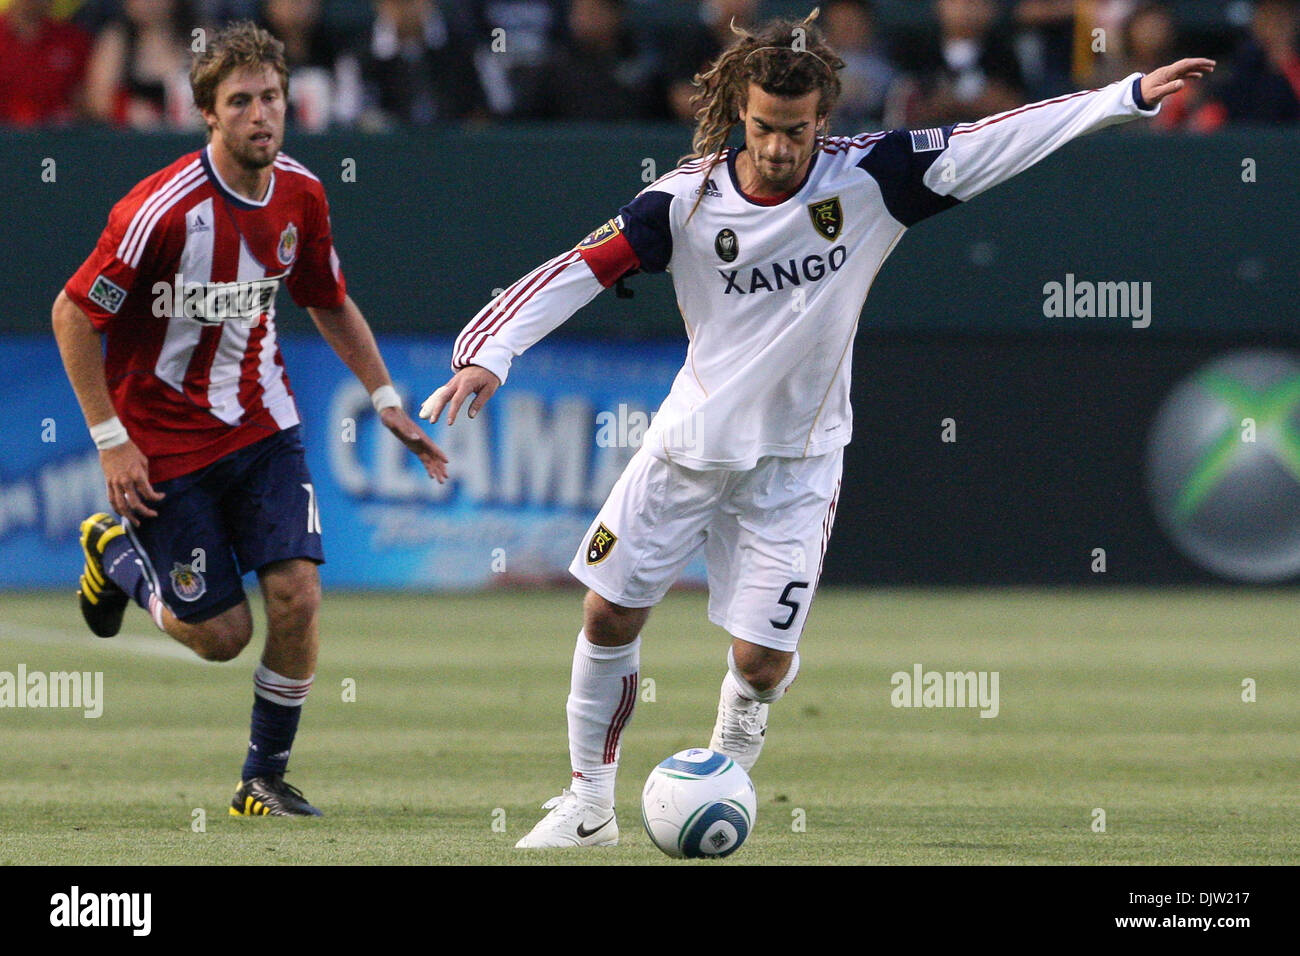 22 May 2010: Real Salt Lake M #5 Kyle Beckerman (R) controls and passes the ball while being pressured by Chivas USA M #18 Blair Gavin (L) during the Chivas USA vs the Real Salt Lake game at the Home Depot Center in Carson, California. Real Salt Lake went on to defeat Chivas USA with a final score of 2-1. Mandatory Credit: Brandon Parry / Southcreek Global (Credit Image: © Brandon  Stock Photo